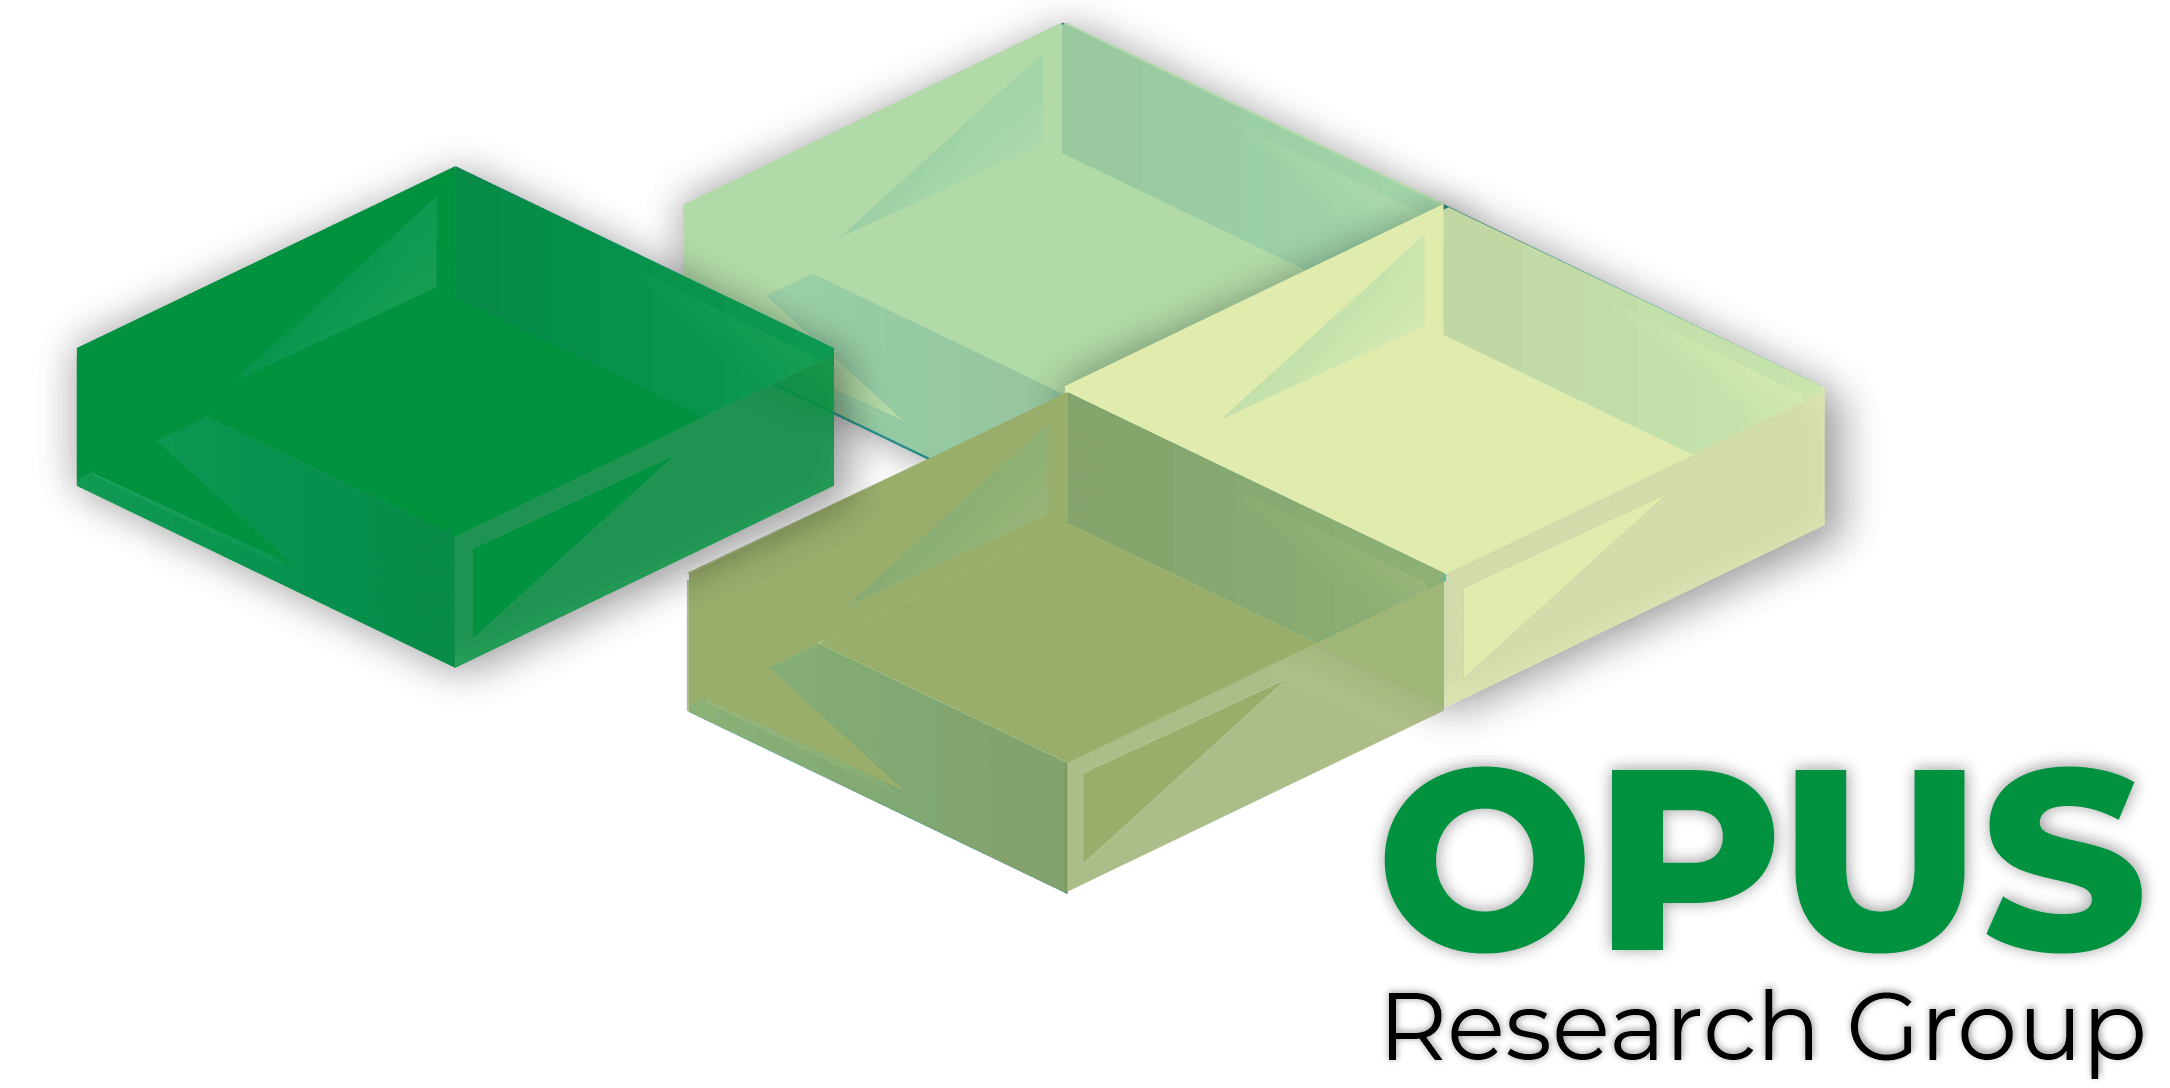 OPUS Research Group